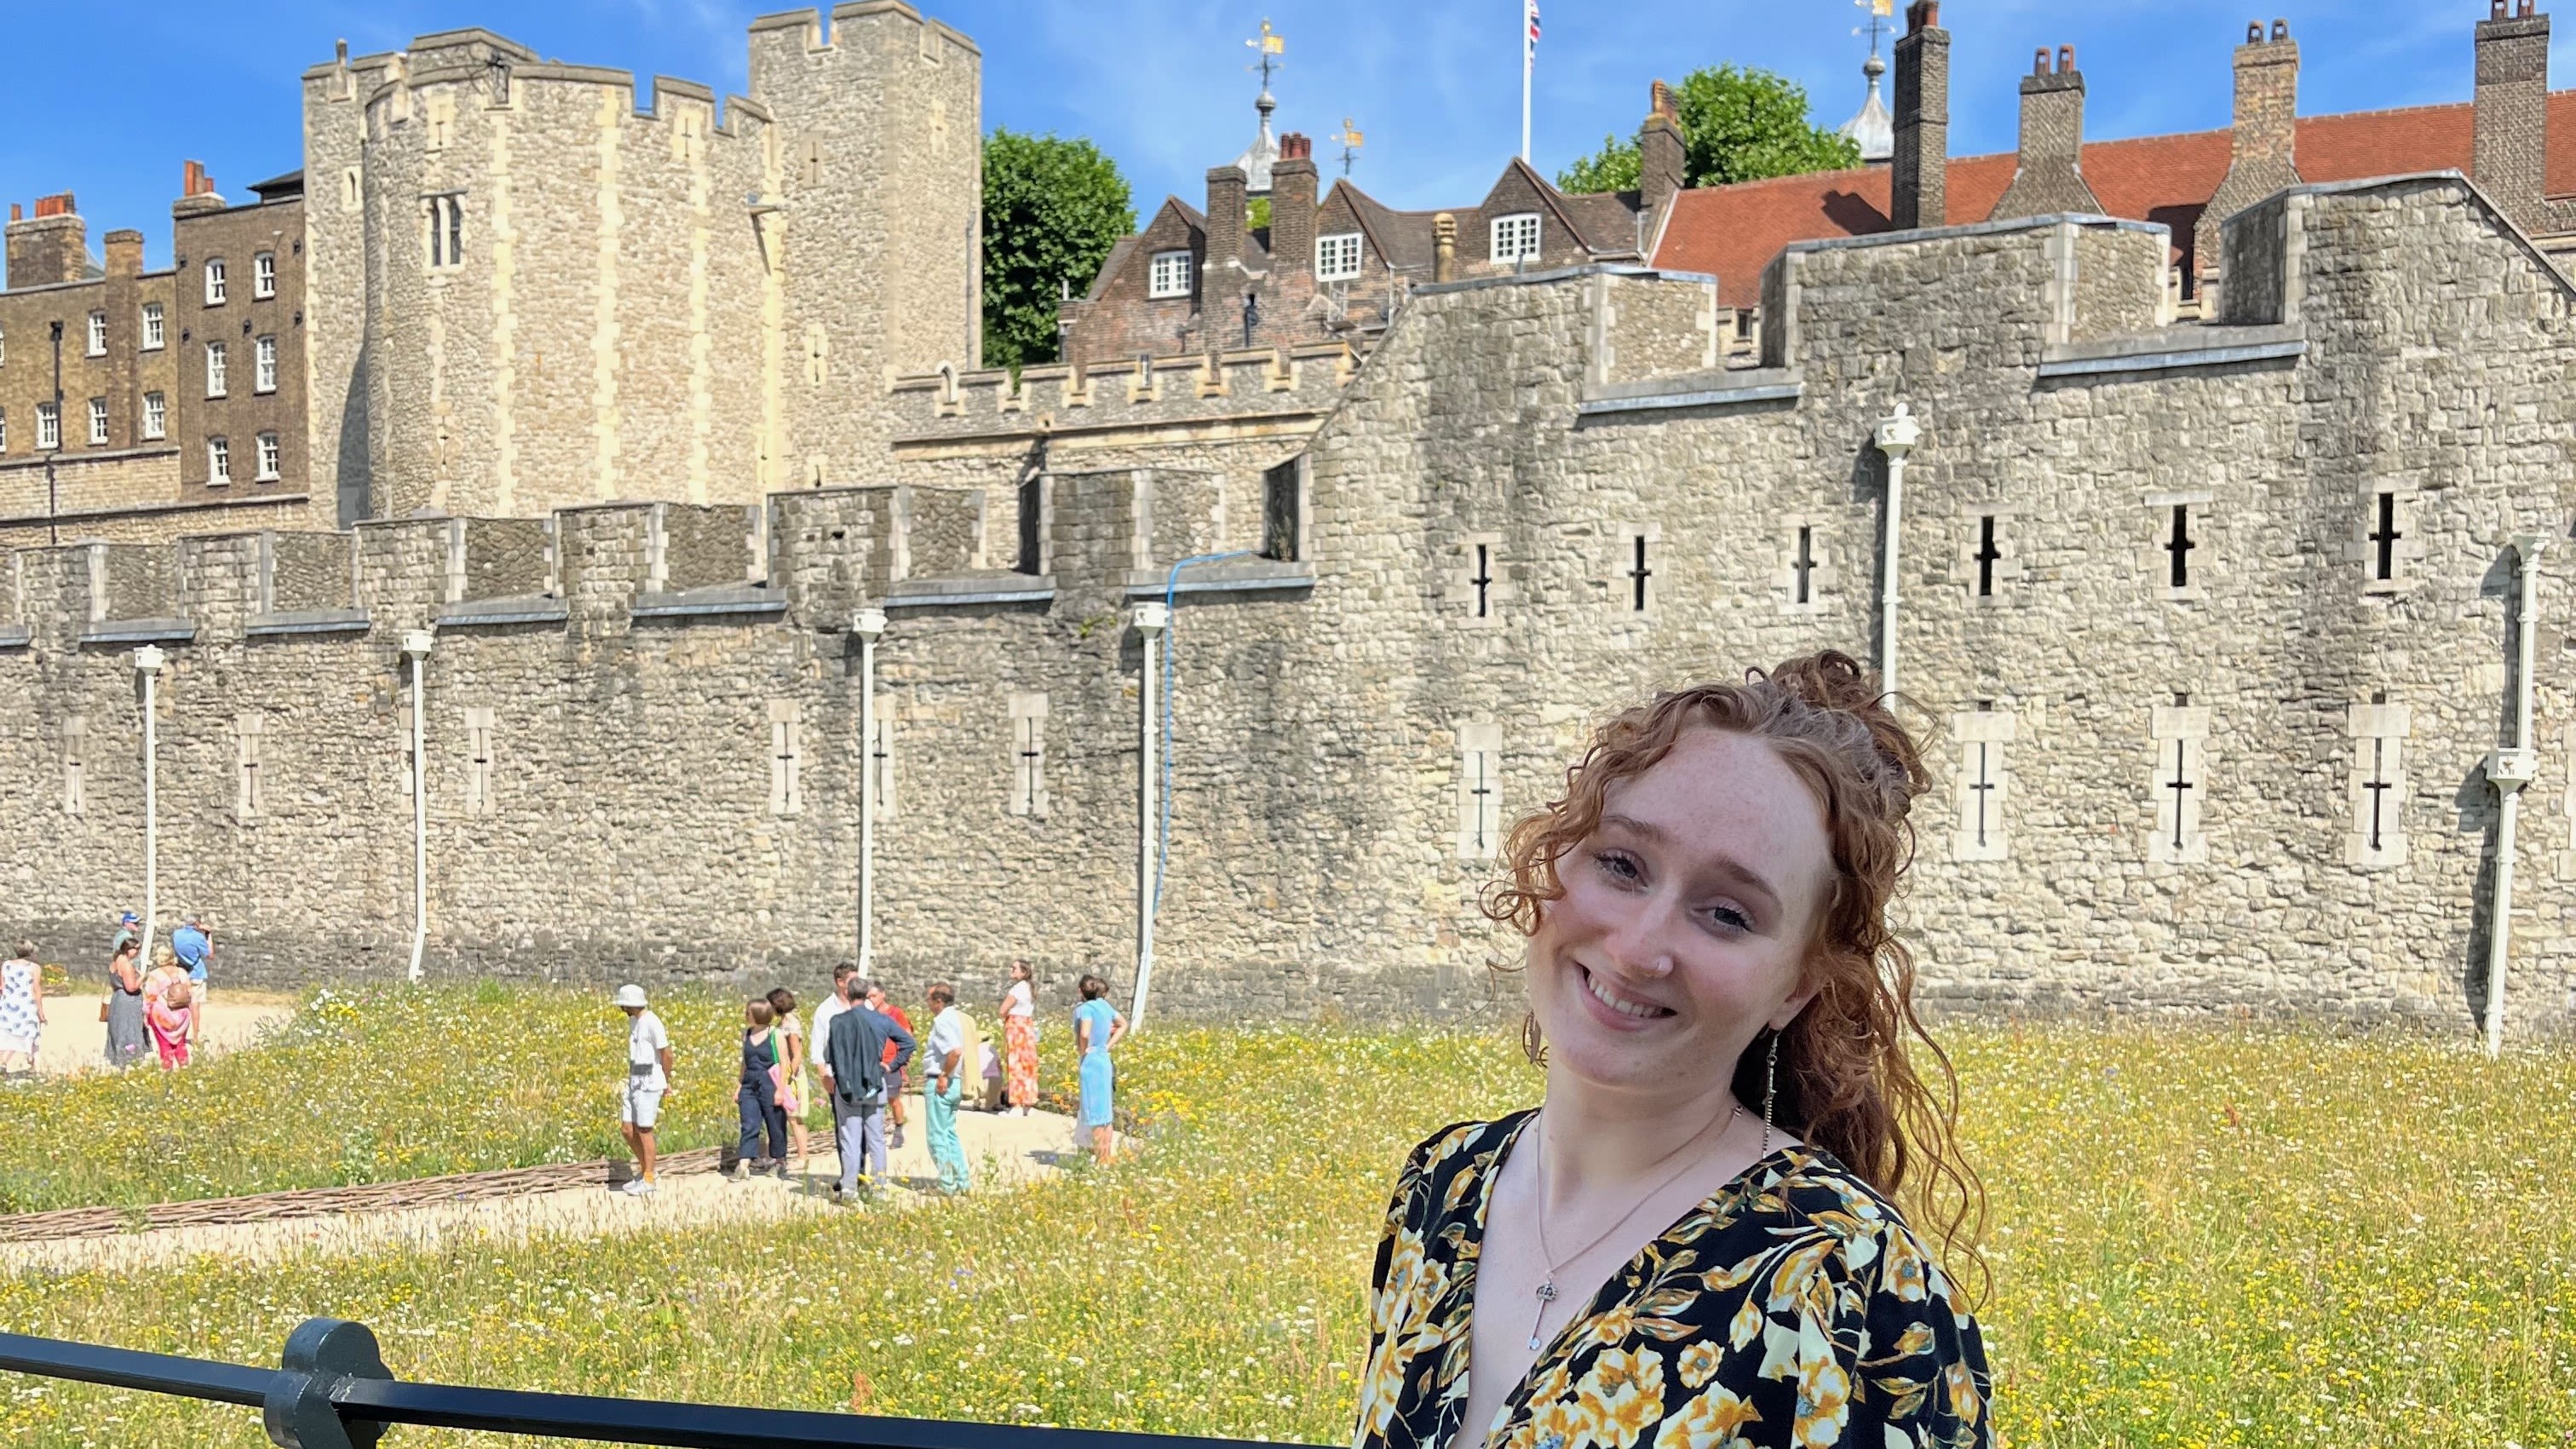 Megan Clawson lived in the Tower of London for three years.